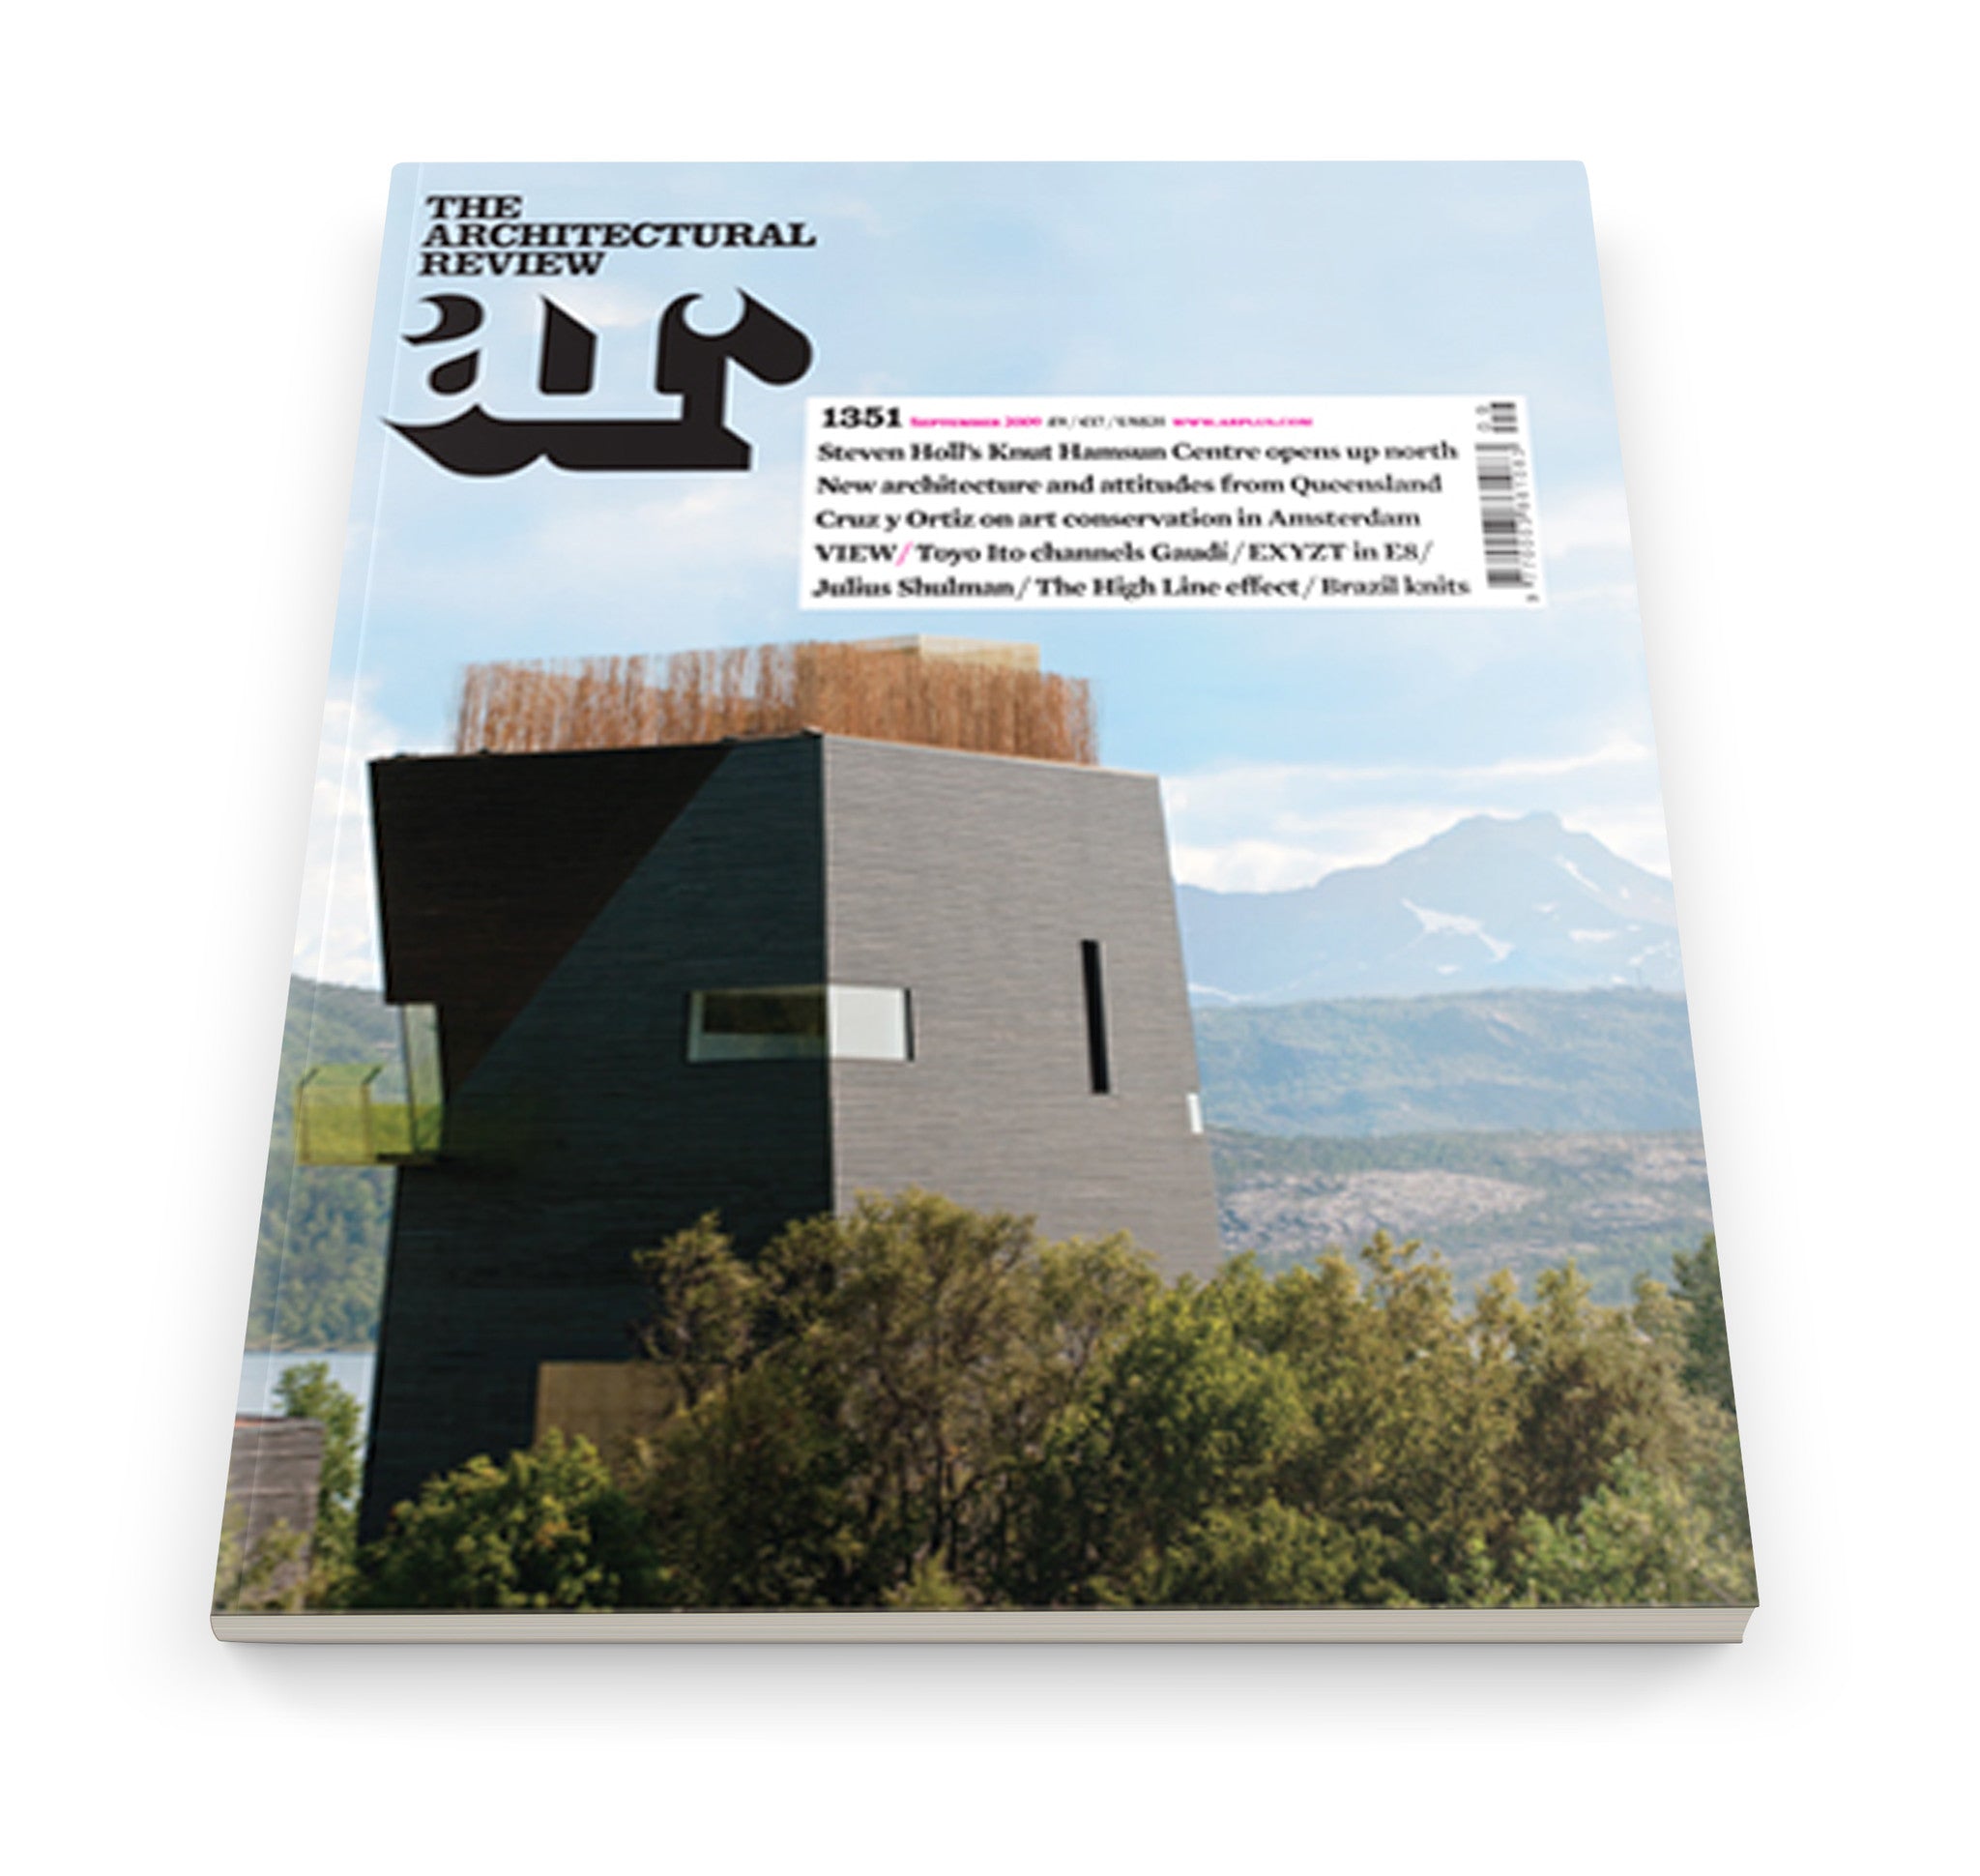 The Architectural Review Issue 1343, January 2009